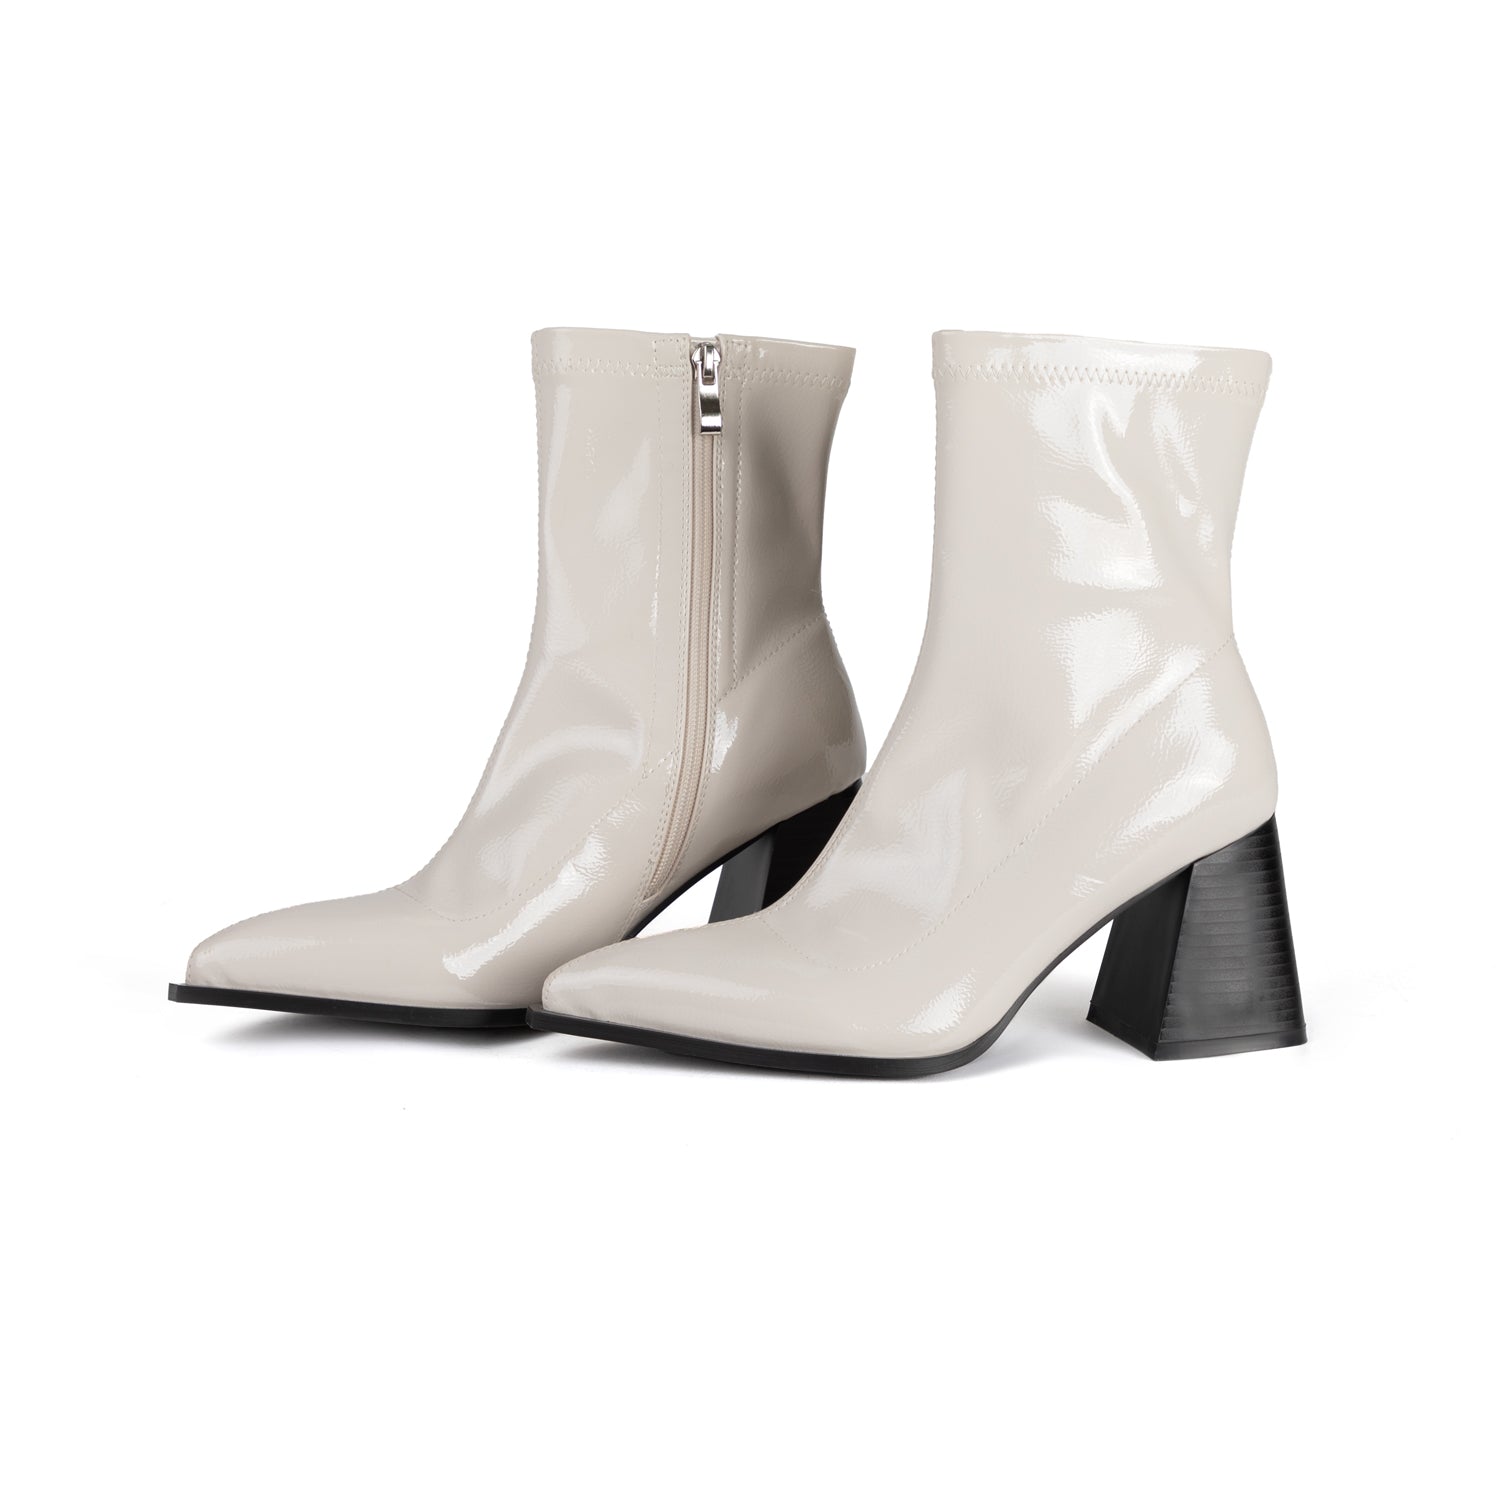 RAID Shalin Block Heeled Ankle Boots in Off White